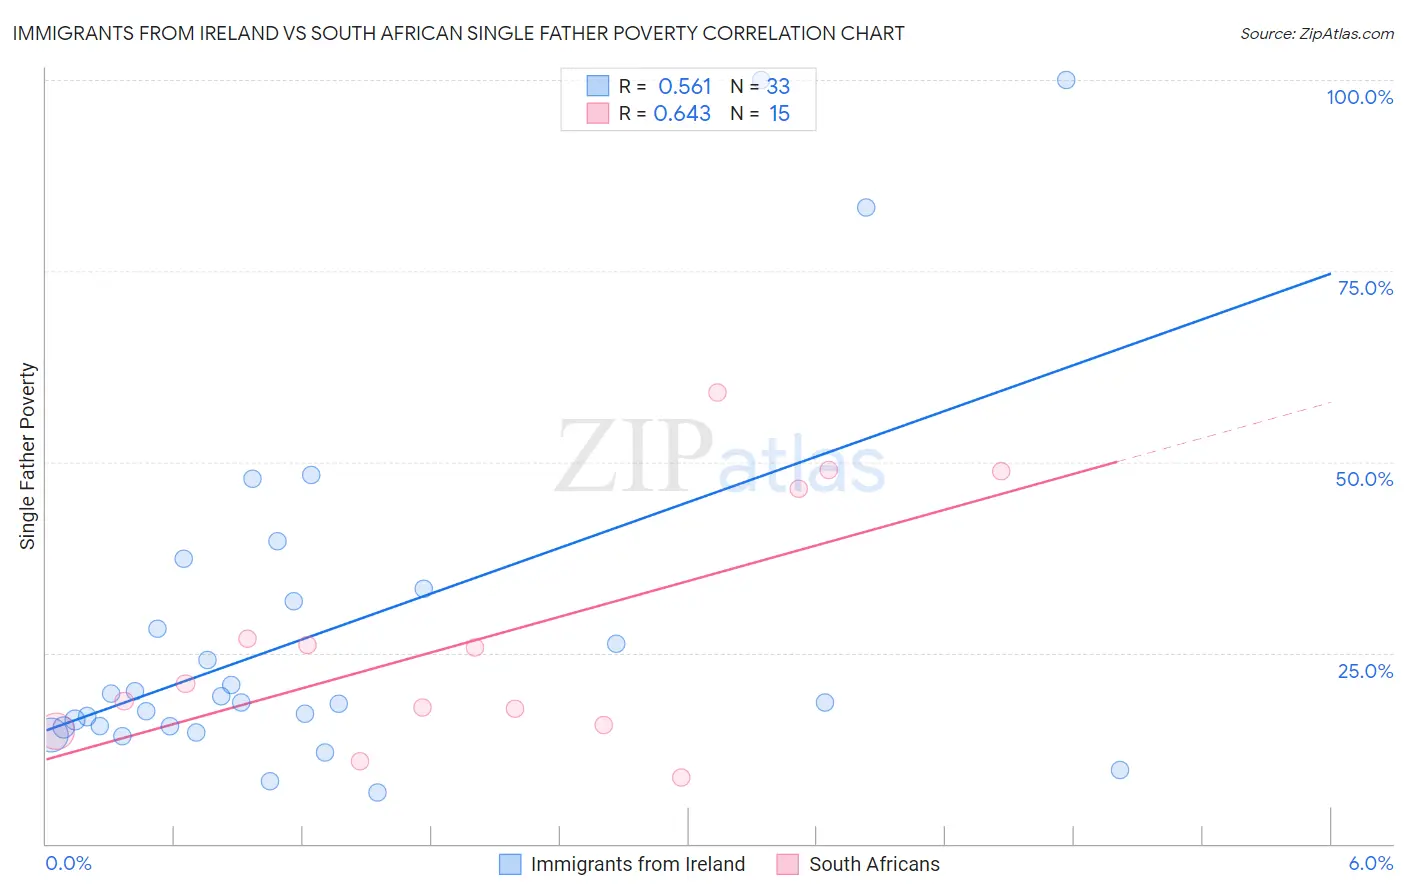 Immigrants from Ireland vs South African Single Father Poverty